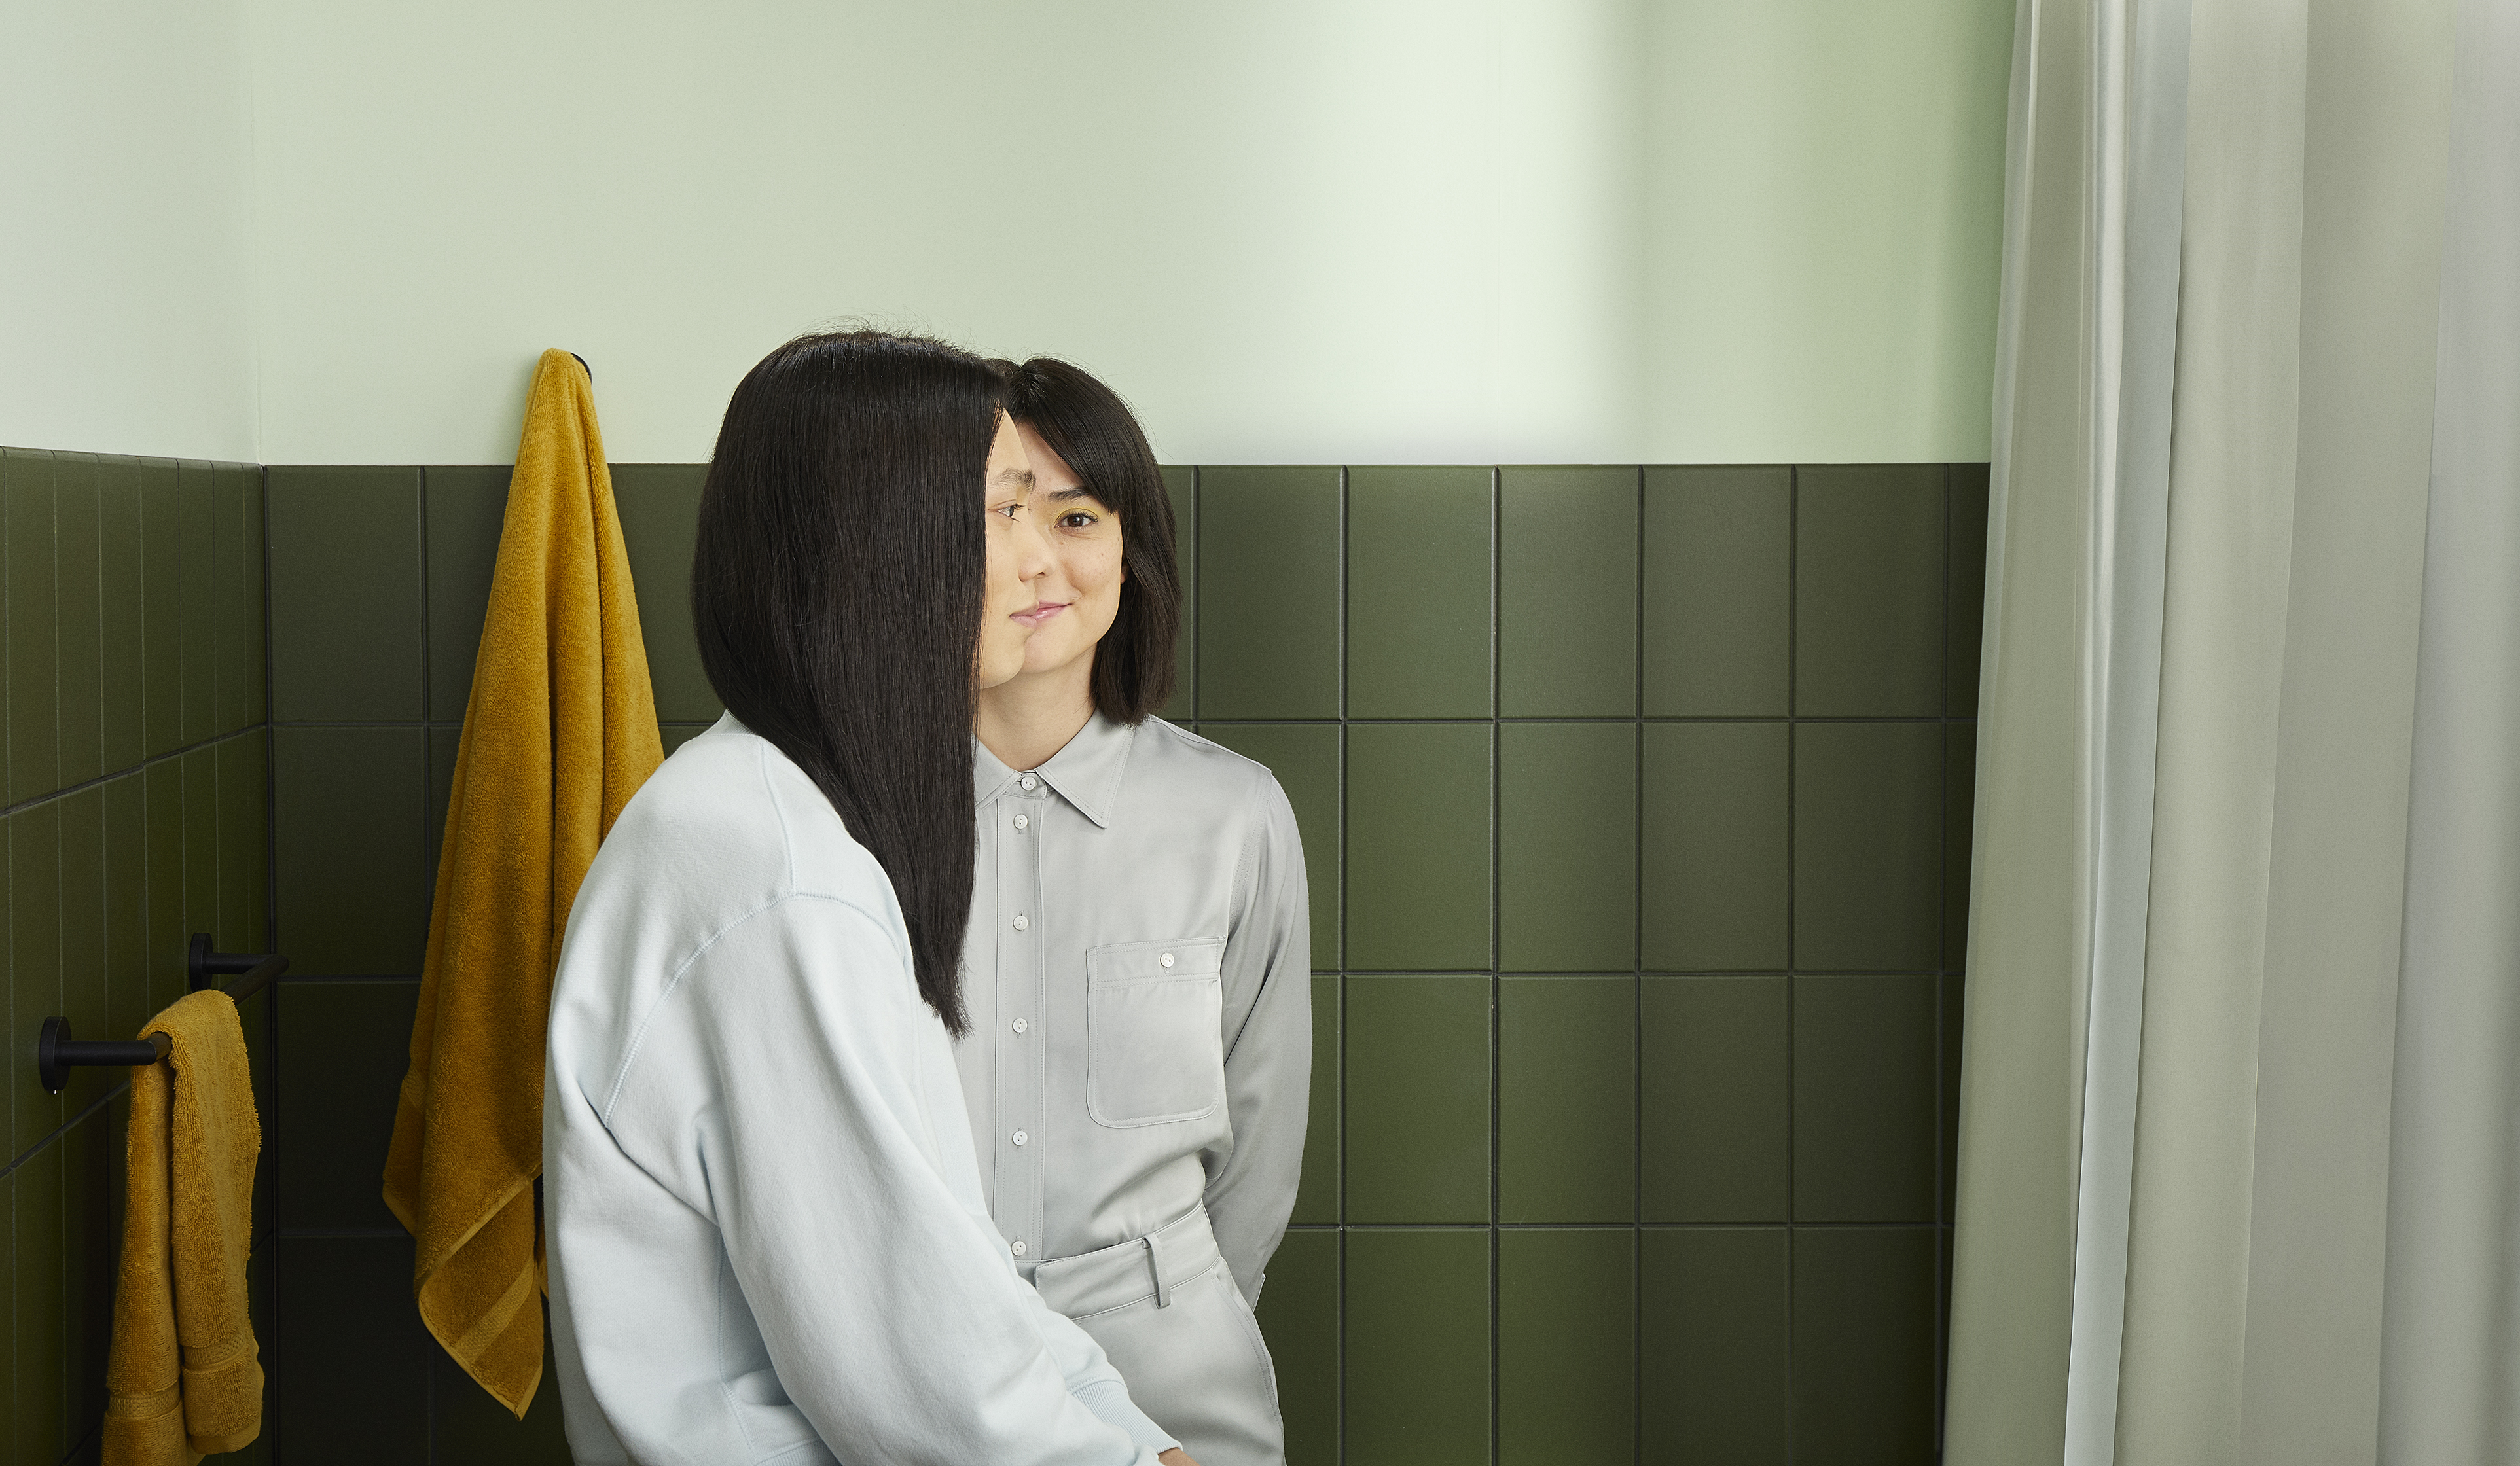 man with long black hair and woman with short black hair stand in a green, tile bathroom together